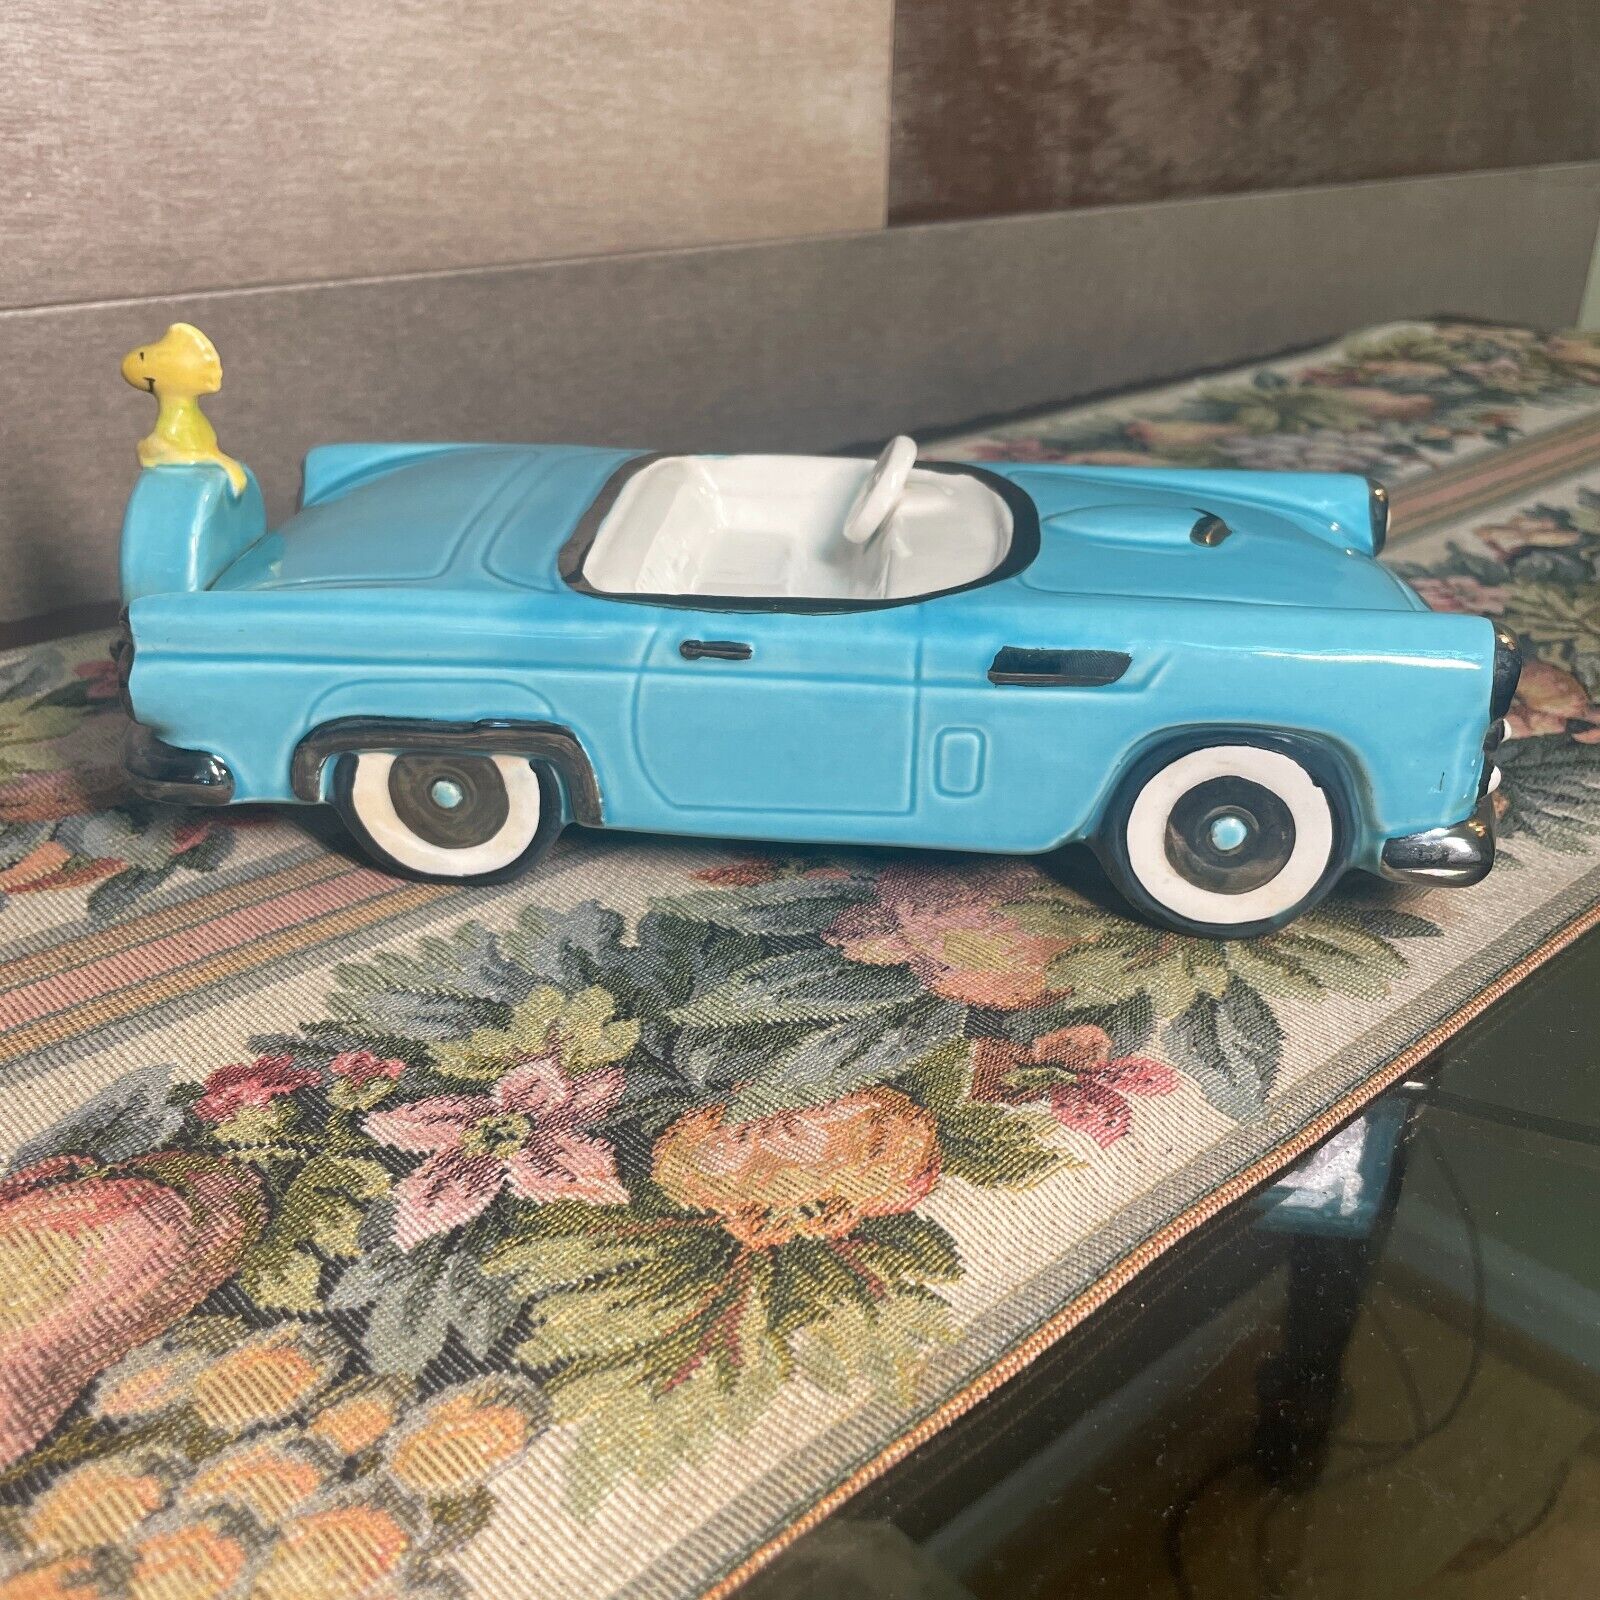 Peanuts Snoopy Woodstock Thunderbird Vintage Car Music Box by Willitts 1989